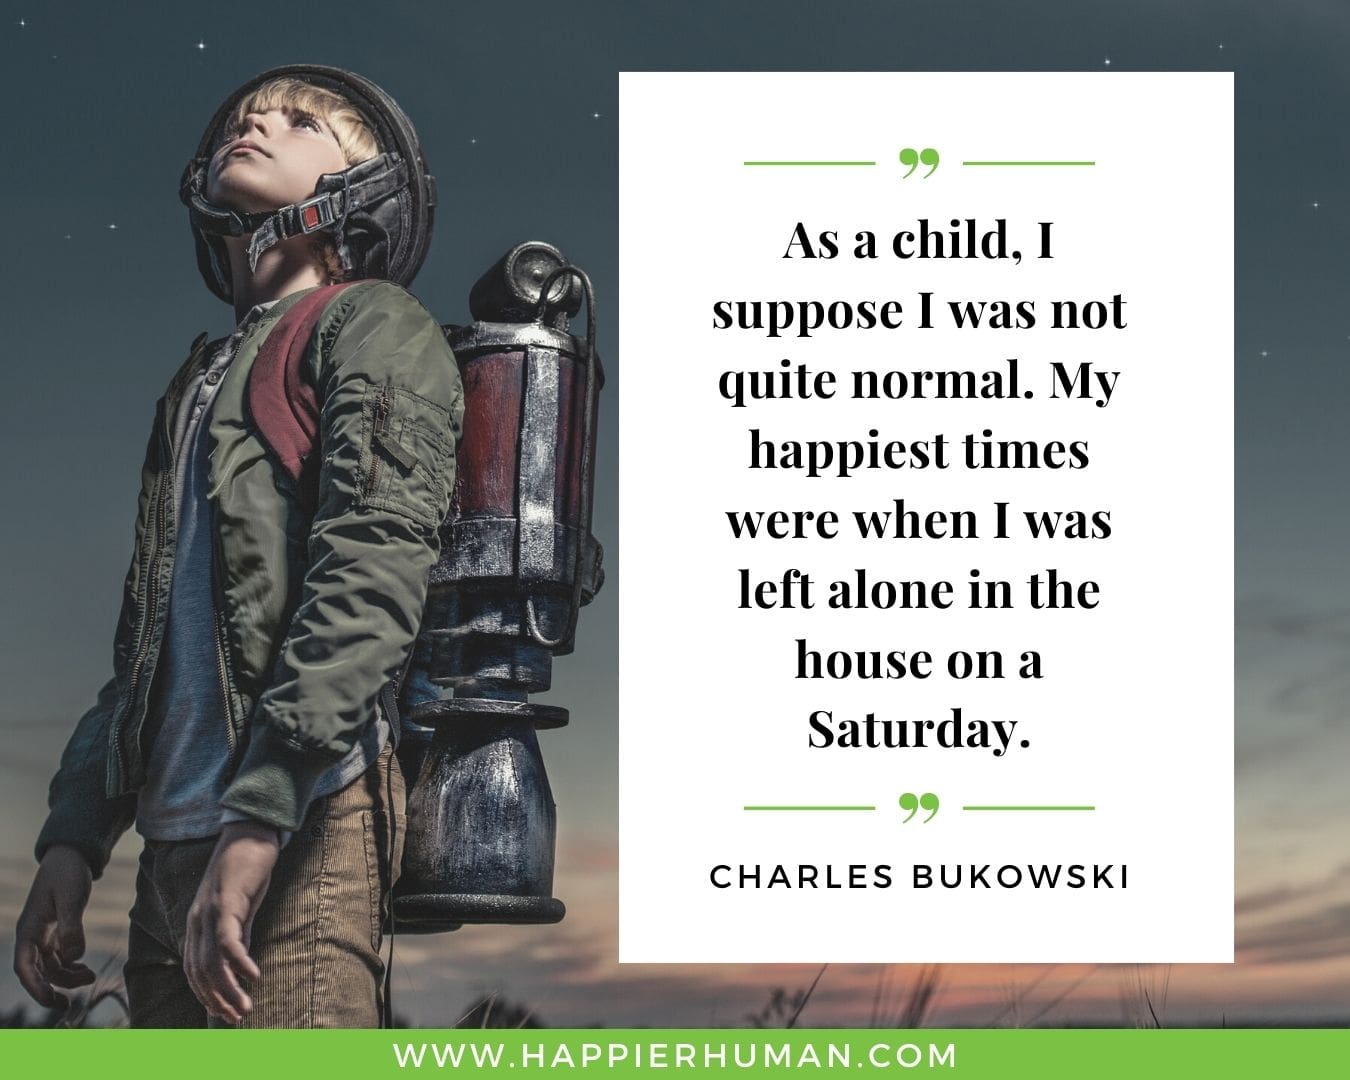 Introvert Quotes - “As a child, I suppose I was not quite normal. My happiest times were when I was left alone in the house on a Saturday.” – Charles Bukowski